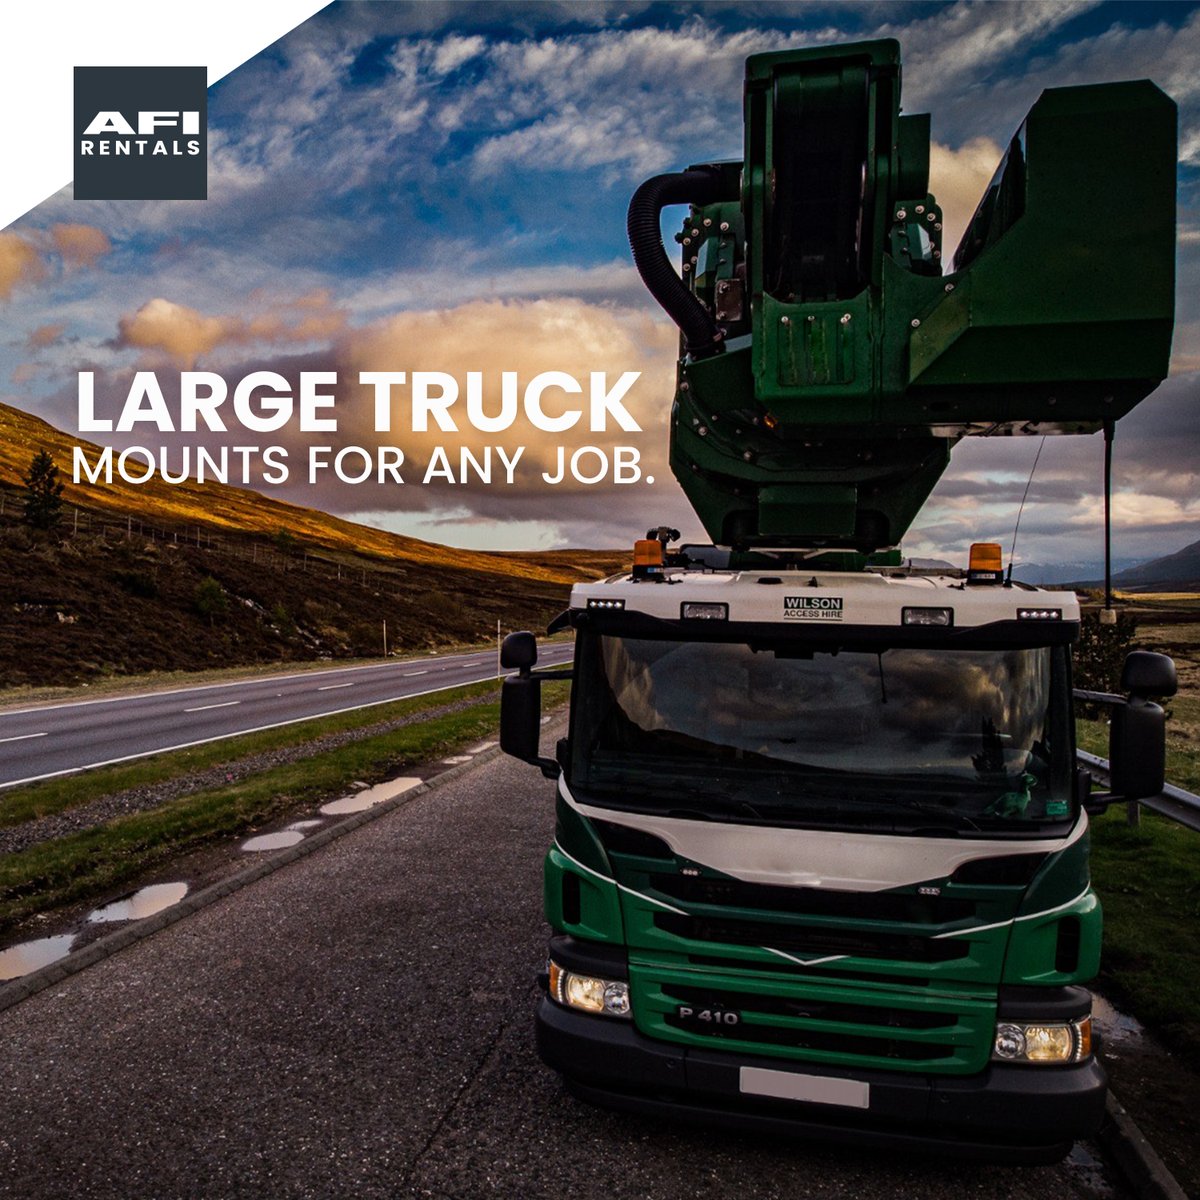 Working at height requires specific expertise and knowledge along with professional equipment.
Click here to learn more:
okt.to/EgDOov

#truckmount #workingatheights #accessplatform #AFIWay #cherrypickerhire #UK  #construction #constructionequipment